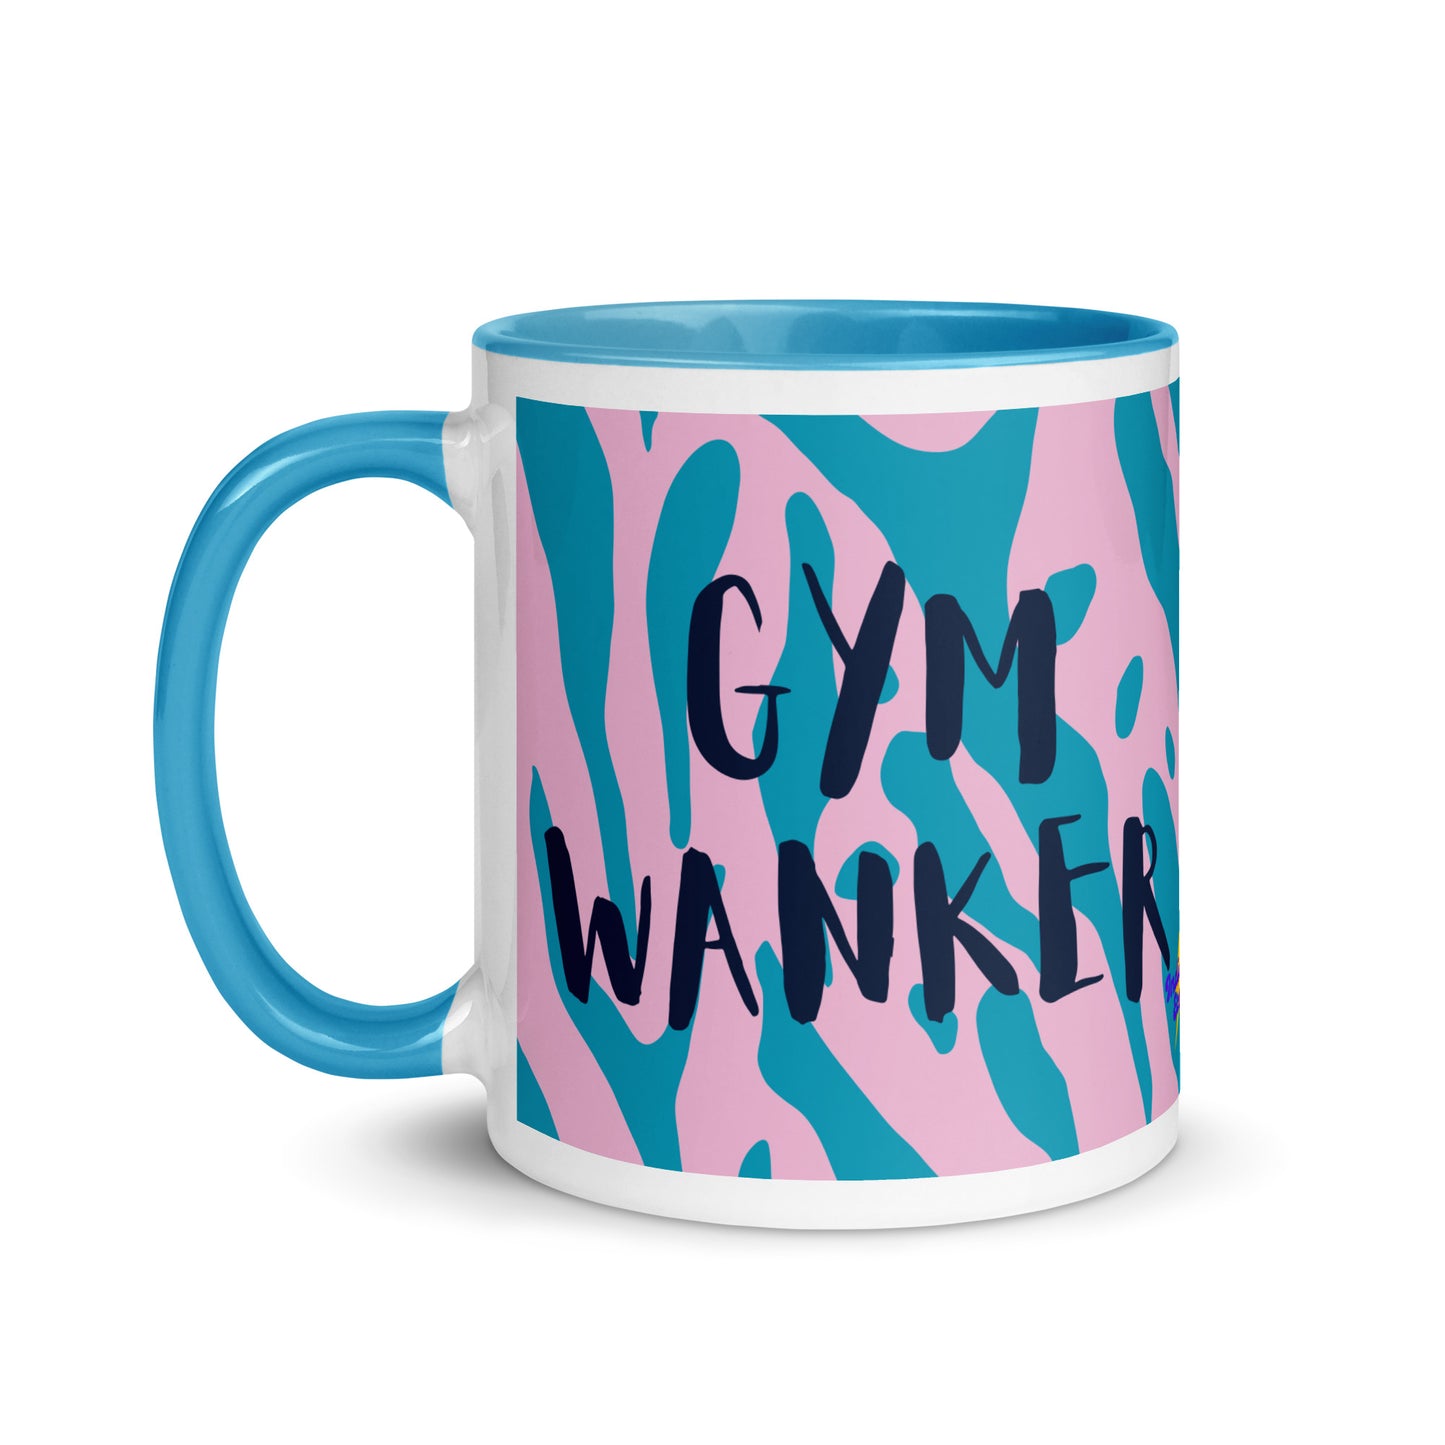 blue handled mug with gym wanker written across a blue and pink animal print background. a gift for people who love the gym